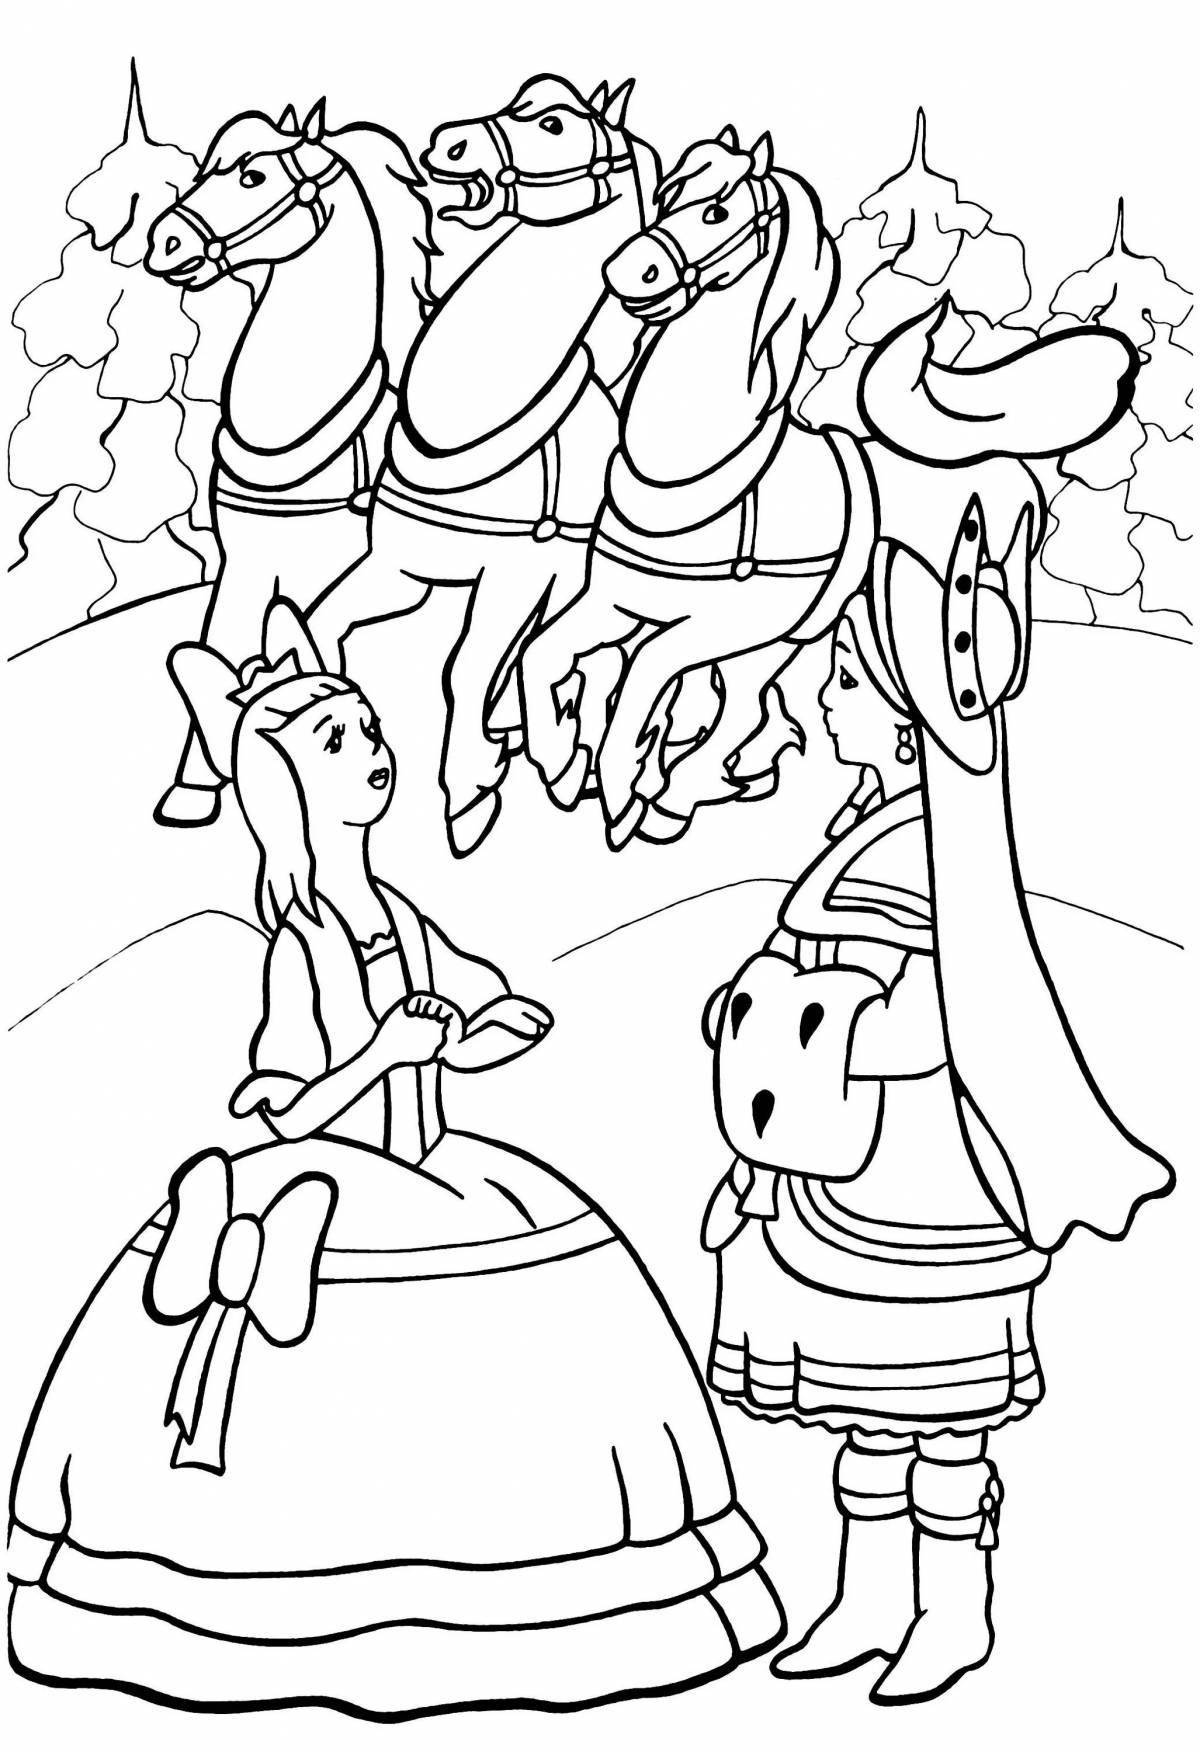 Surreal coloring page 12